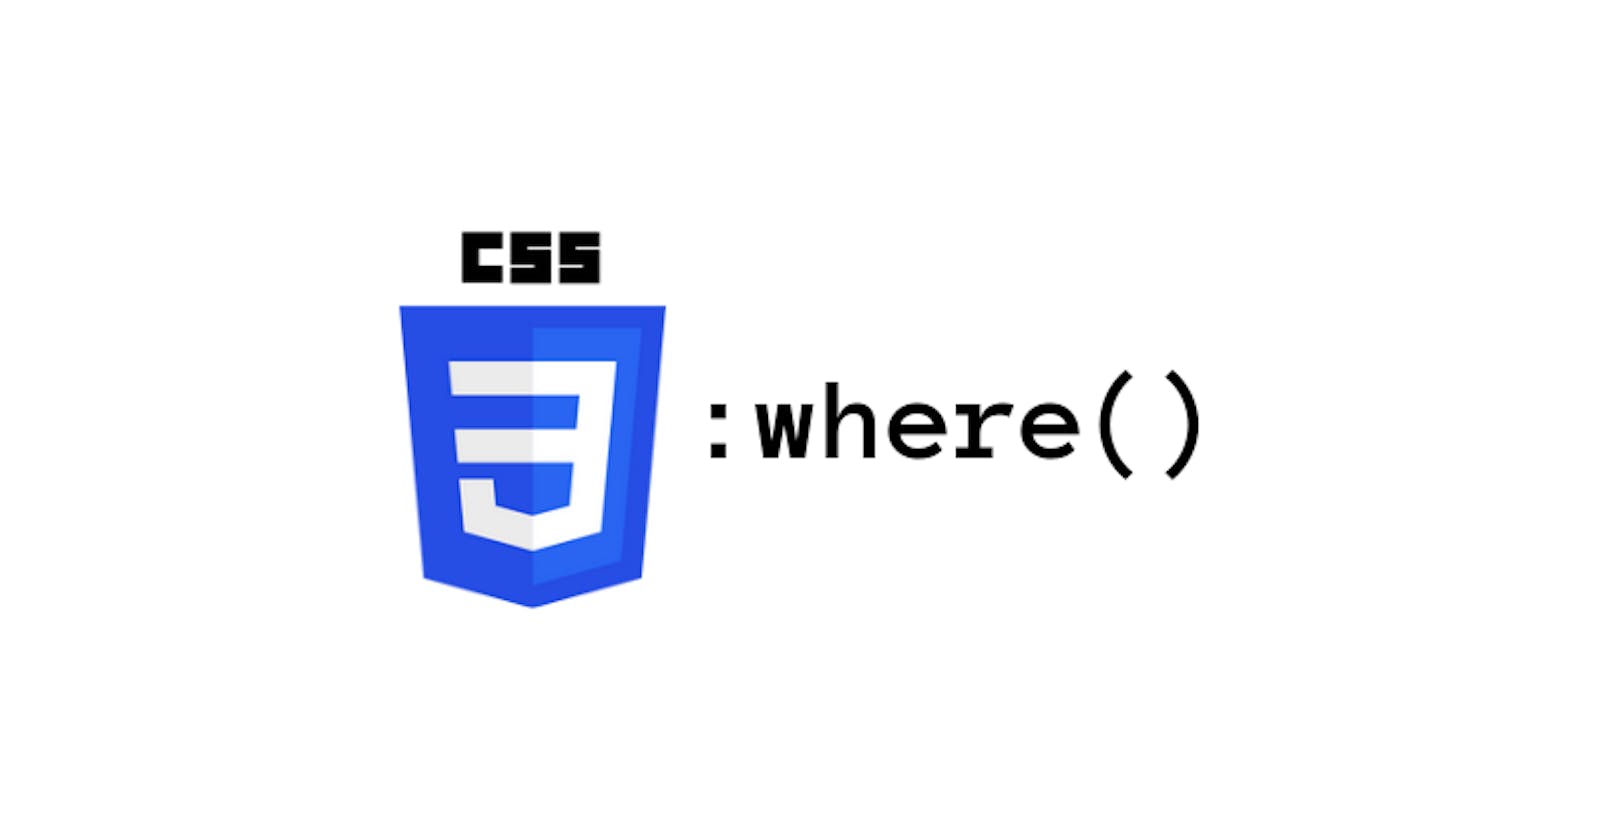 Deep dive into the CSS :where() function